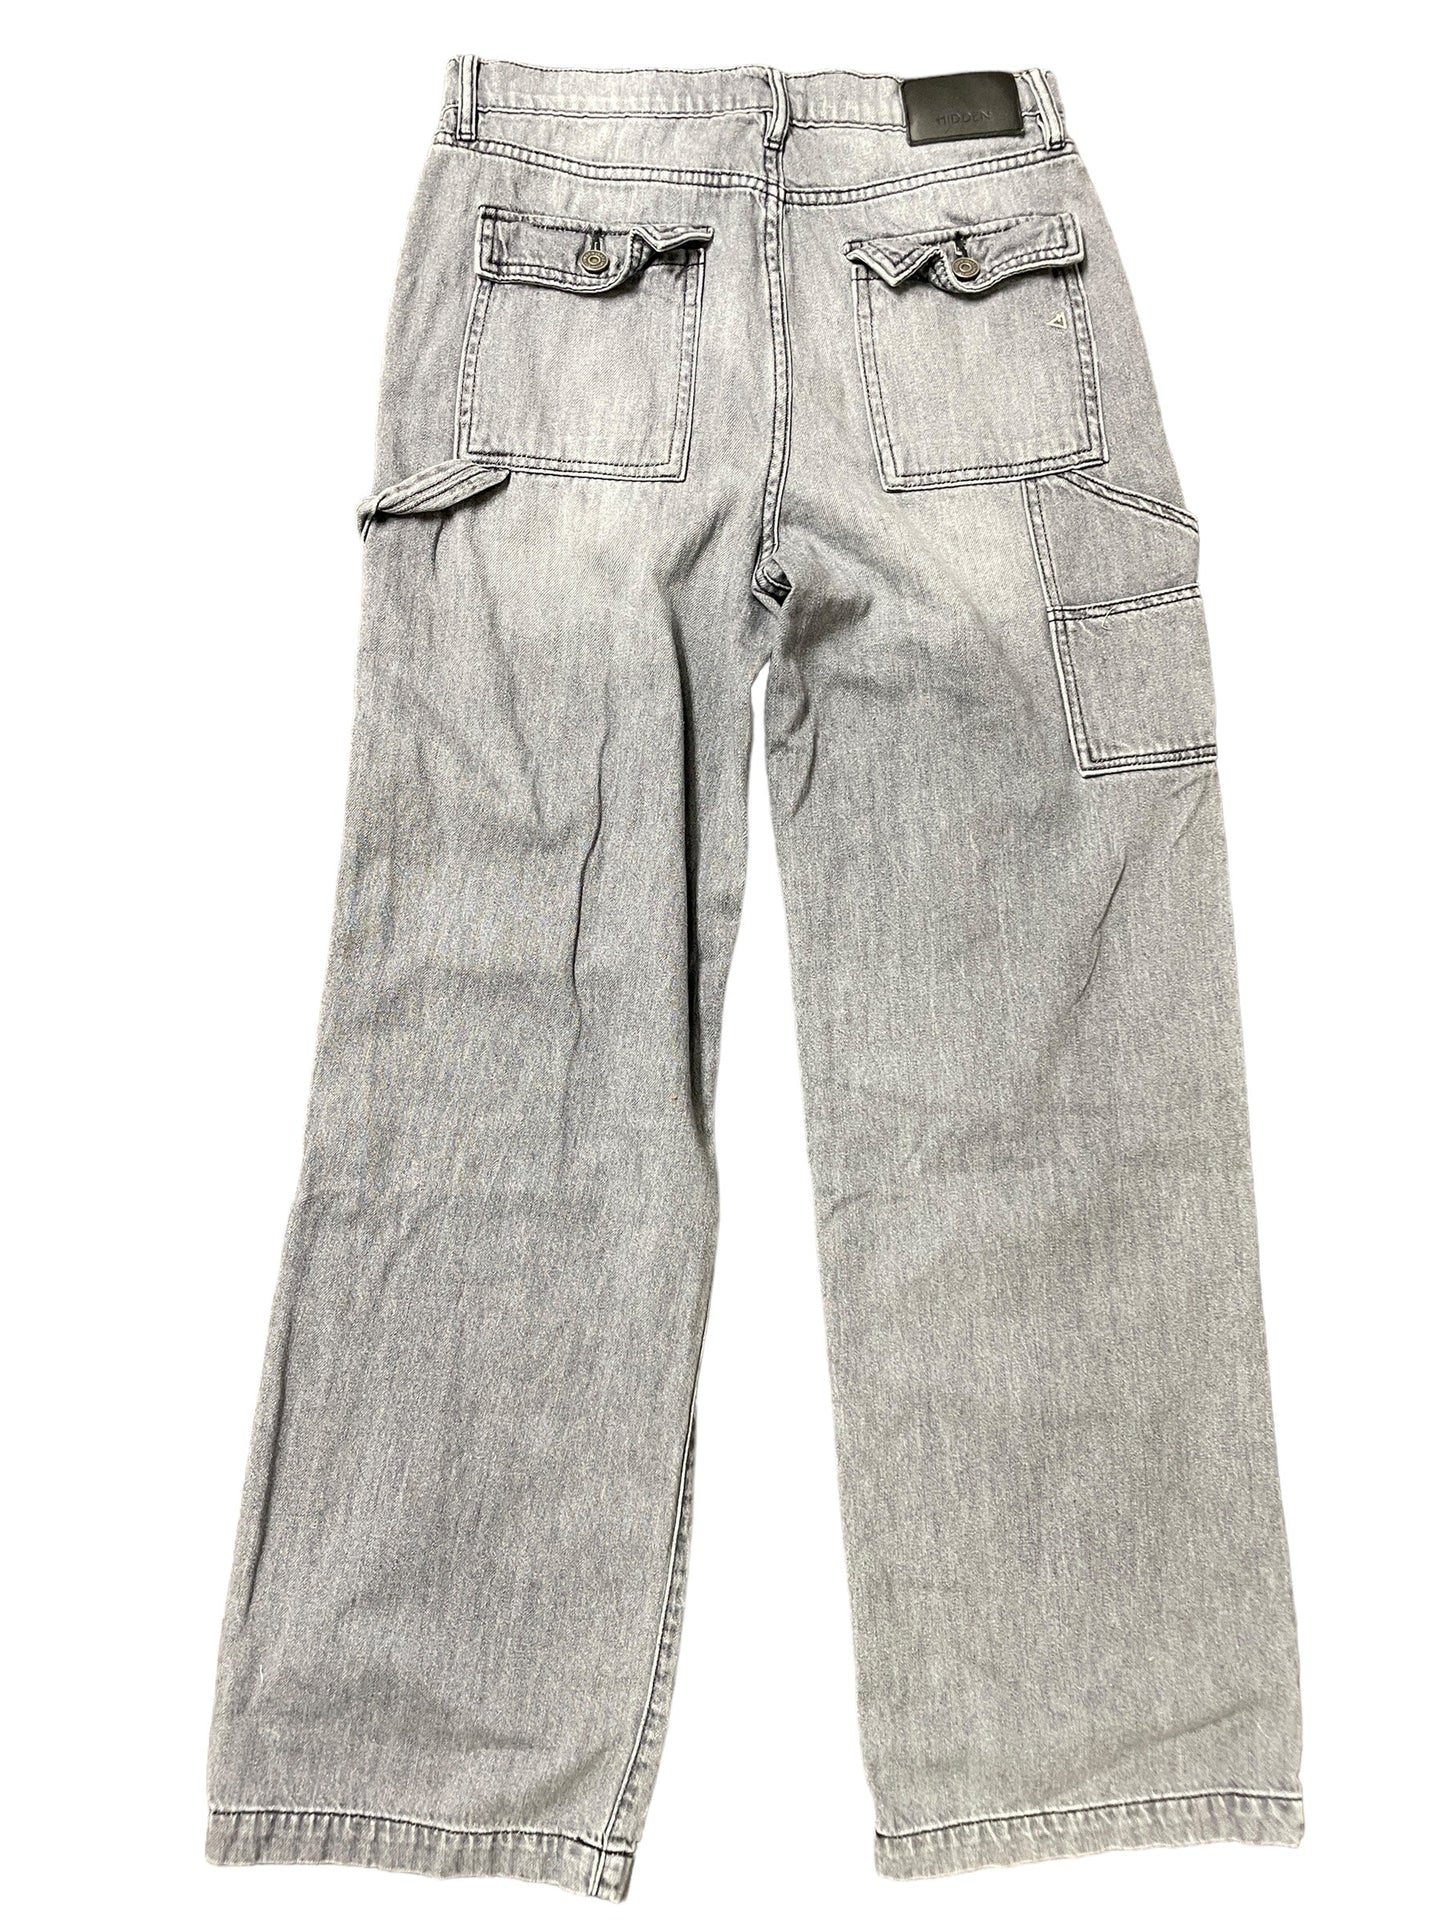 Grey Pants Cargo & Utility Altard State, Size 8